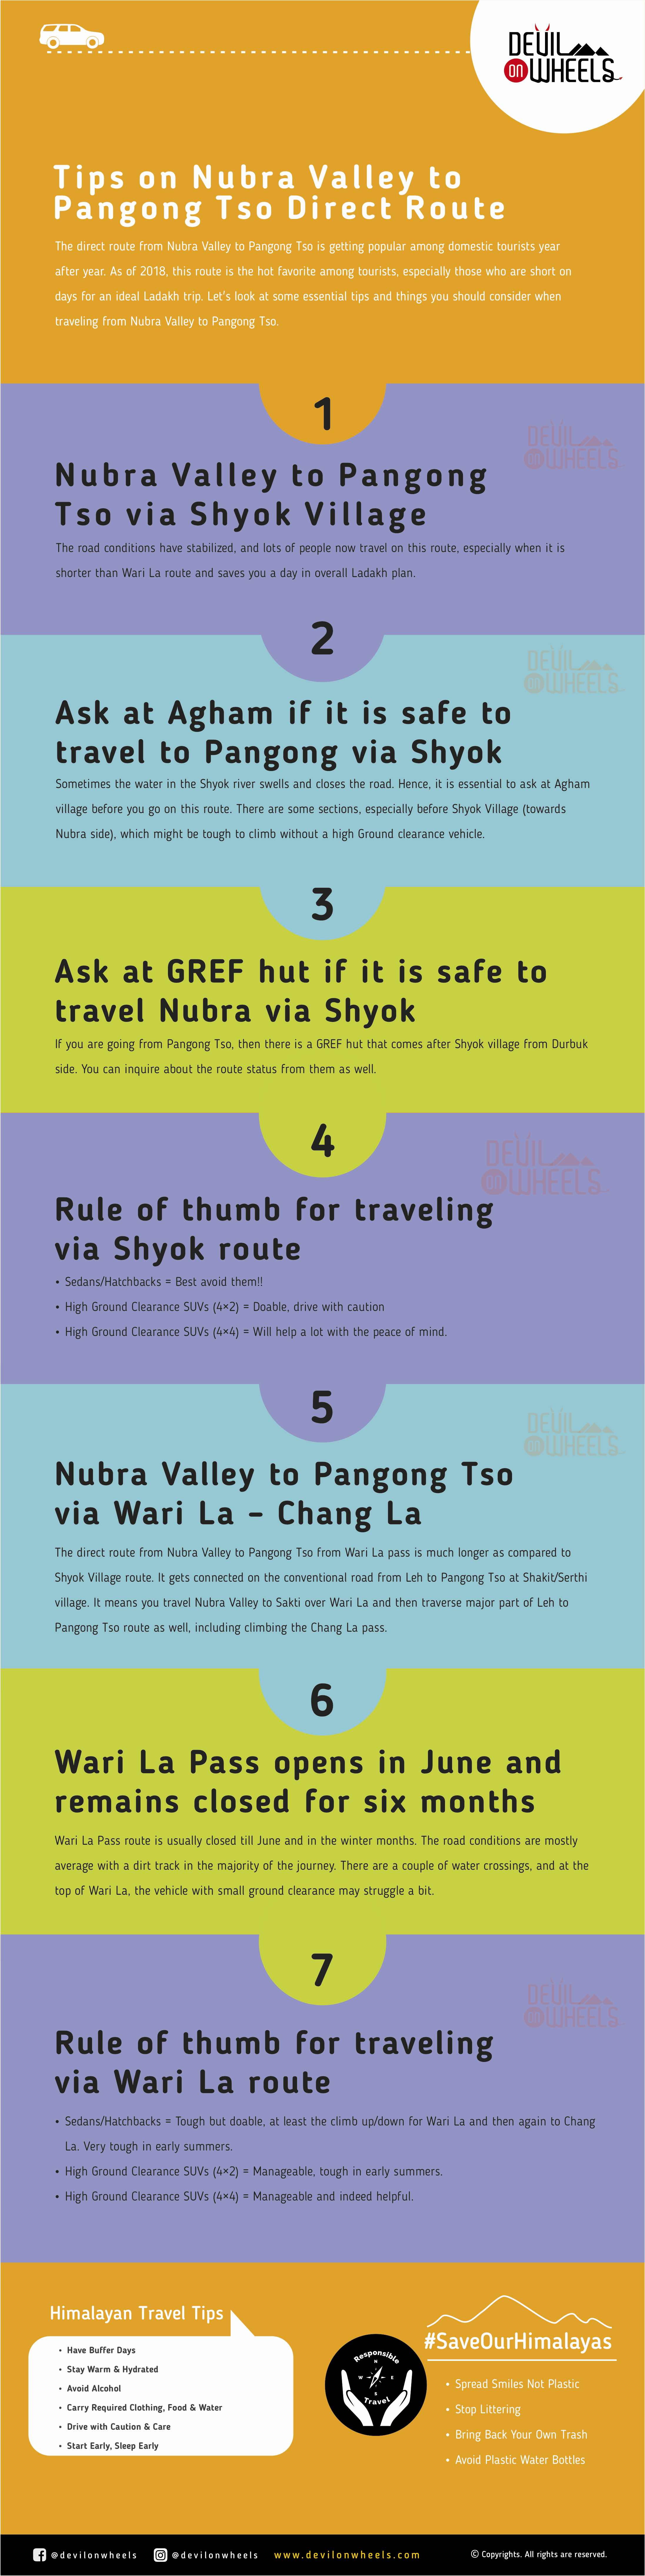 Tips about traveling directly from Nubra Valley to Pangong Tso